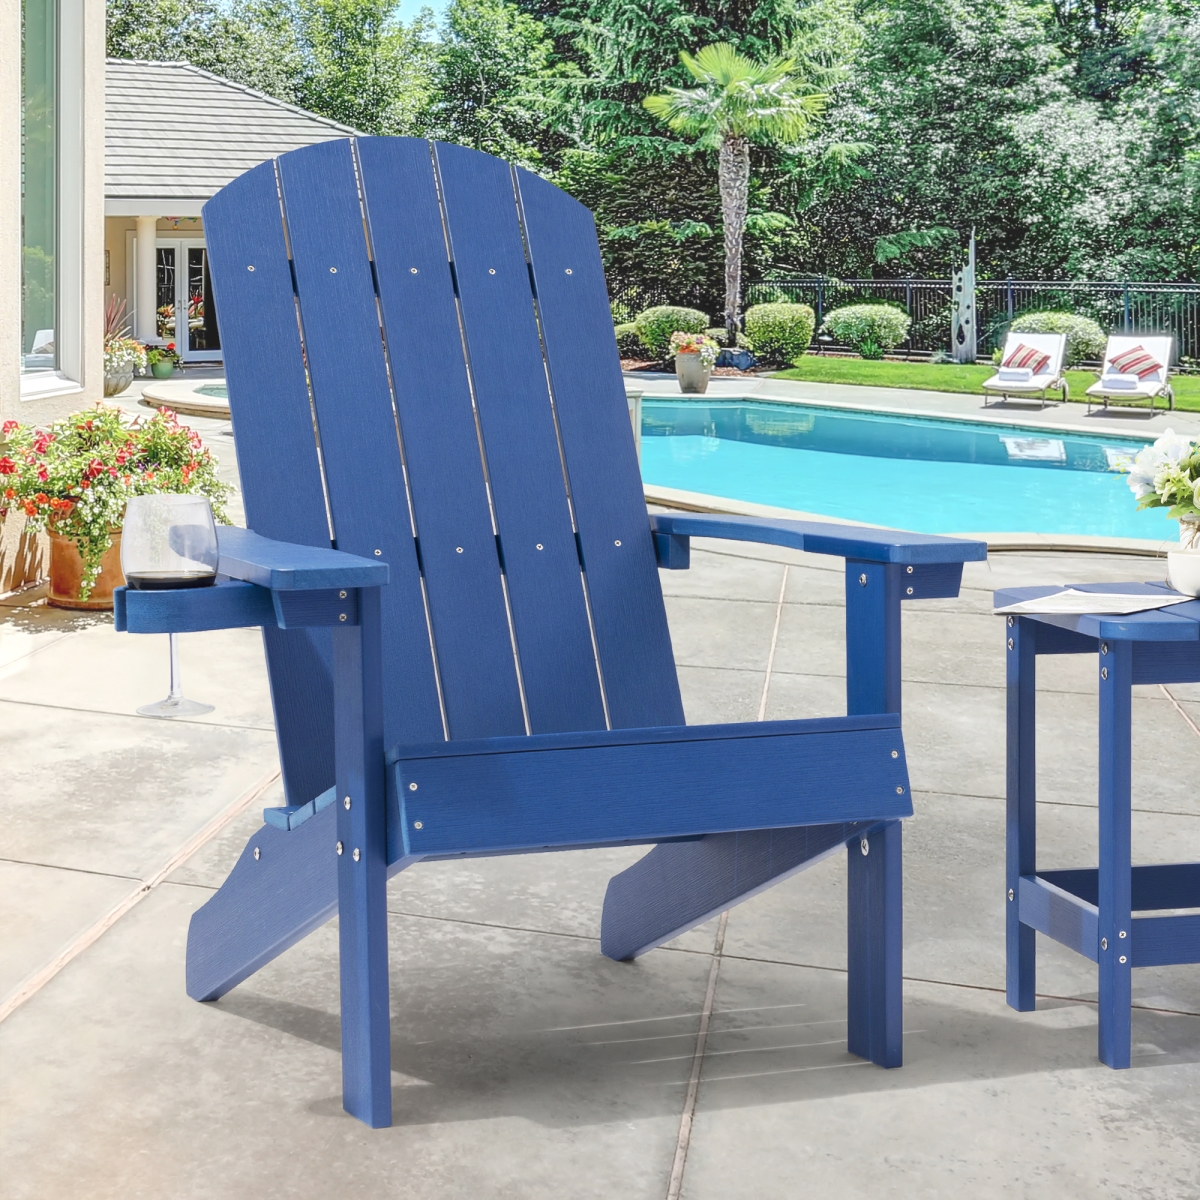 Picture of SANLUCE UN-AC-01-NY Navy Blue Recyled Plastic Weather Resistant Adirondack Chair with Cup Holder